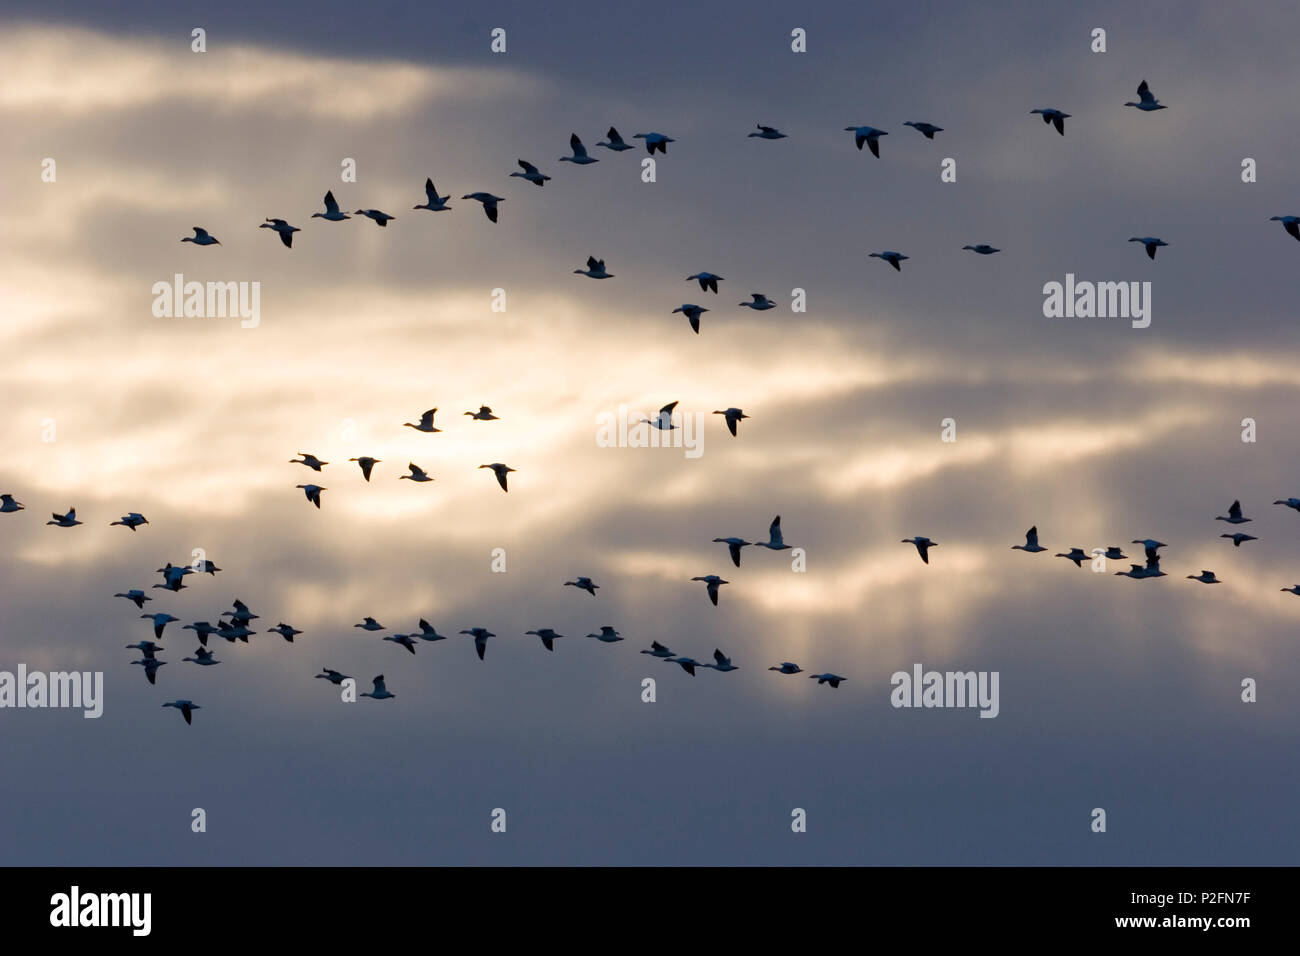 Snow Geese flying at dawn, Anser caerulescens atlanticus, Chen caerulescens, Bosque del Apache, New Mexico, USA Stock Photo